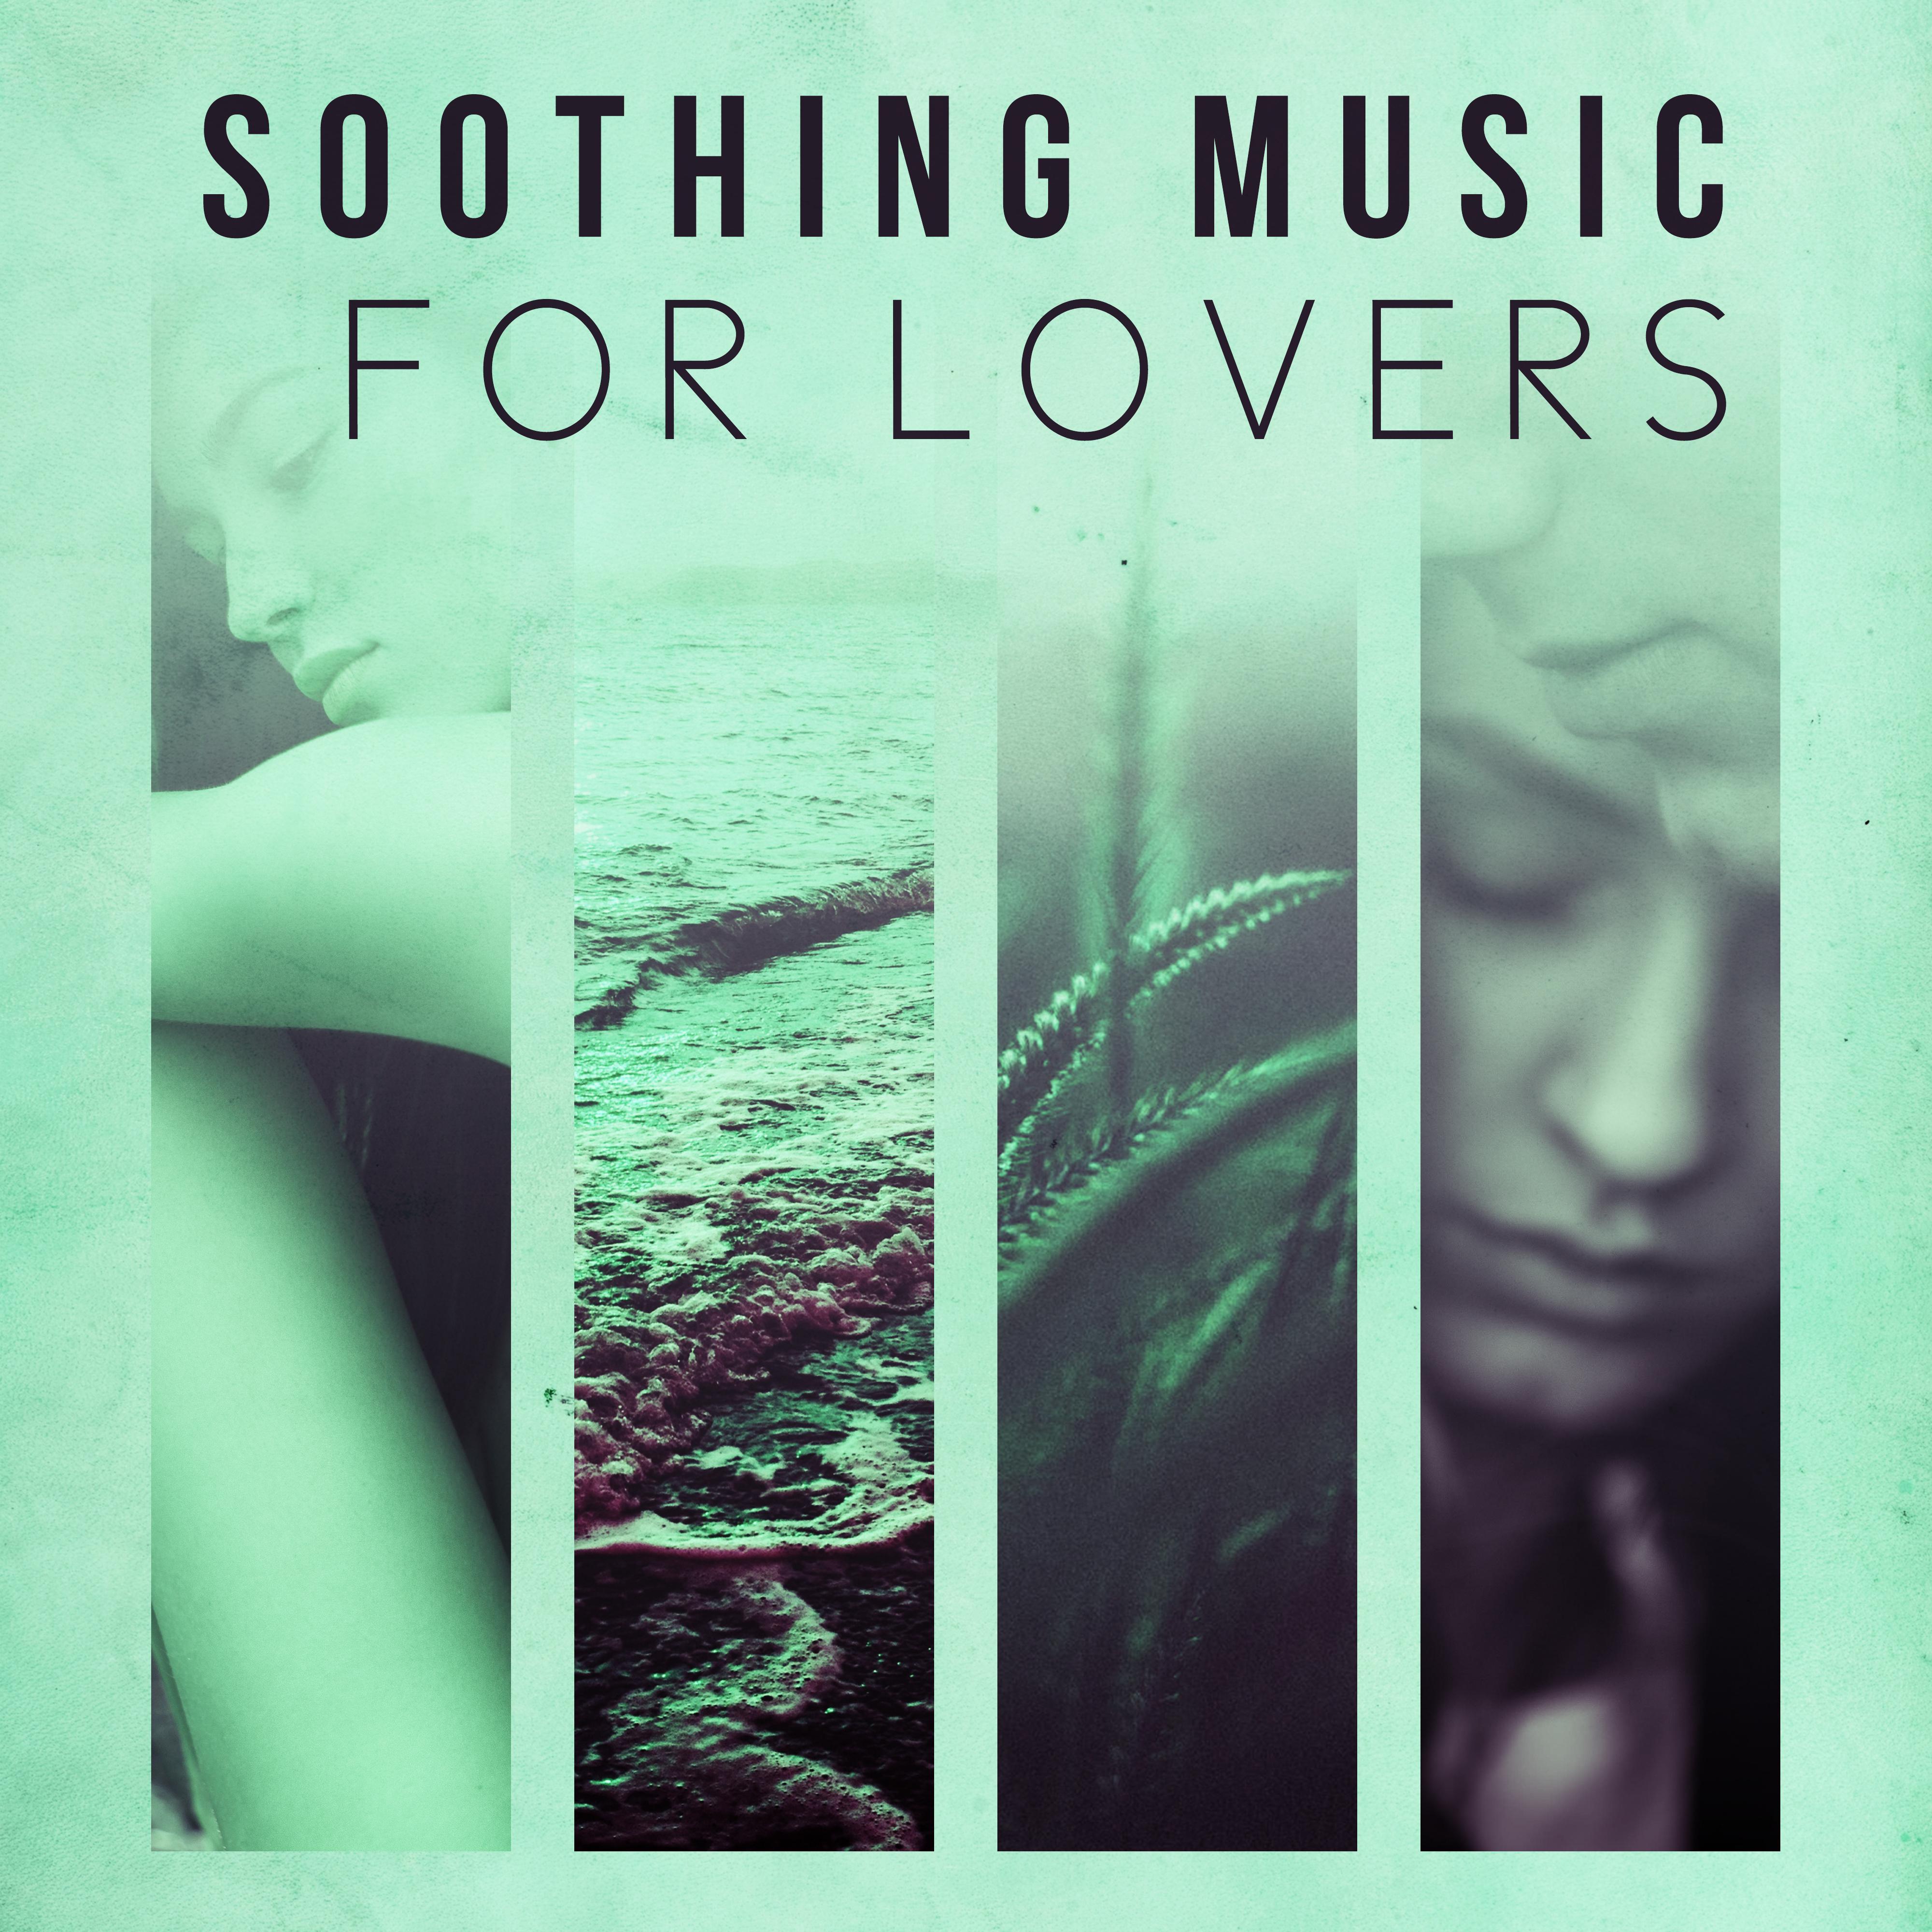 Soothing Music for Lovers - Taste of Jazz, Romantic Evening, Candle Light Dinner